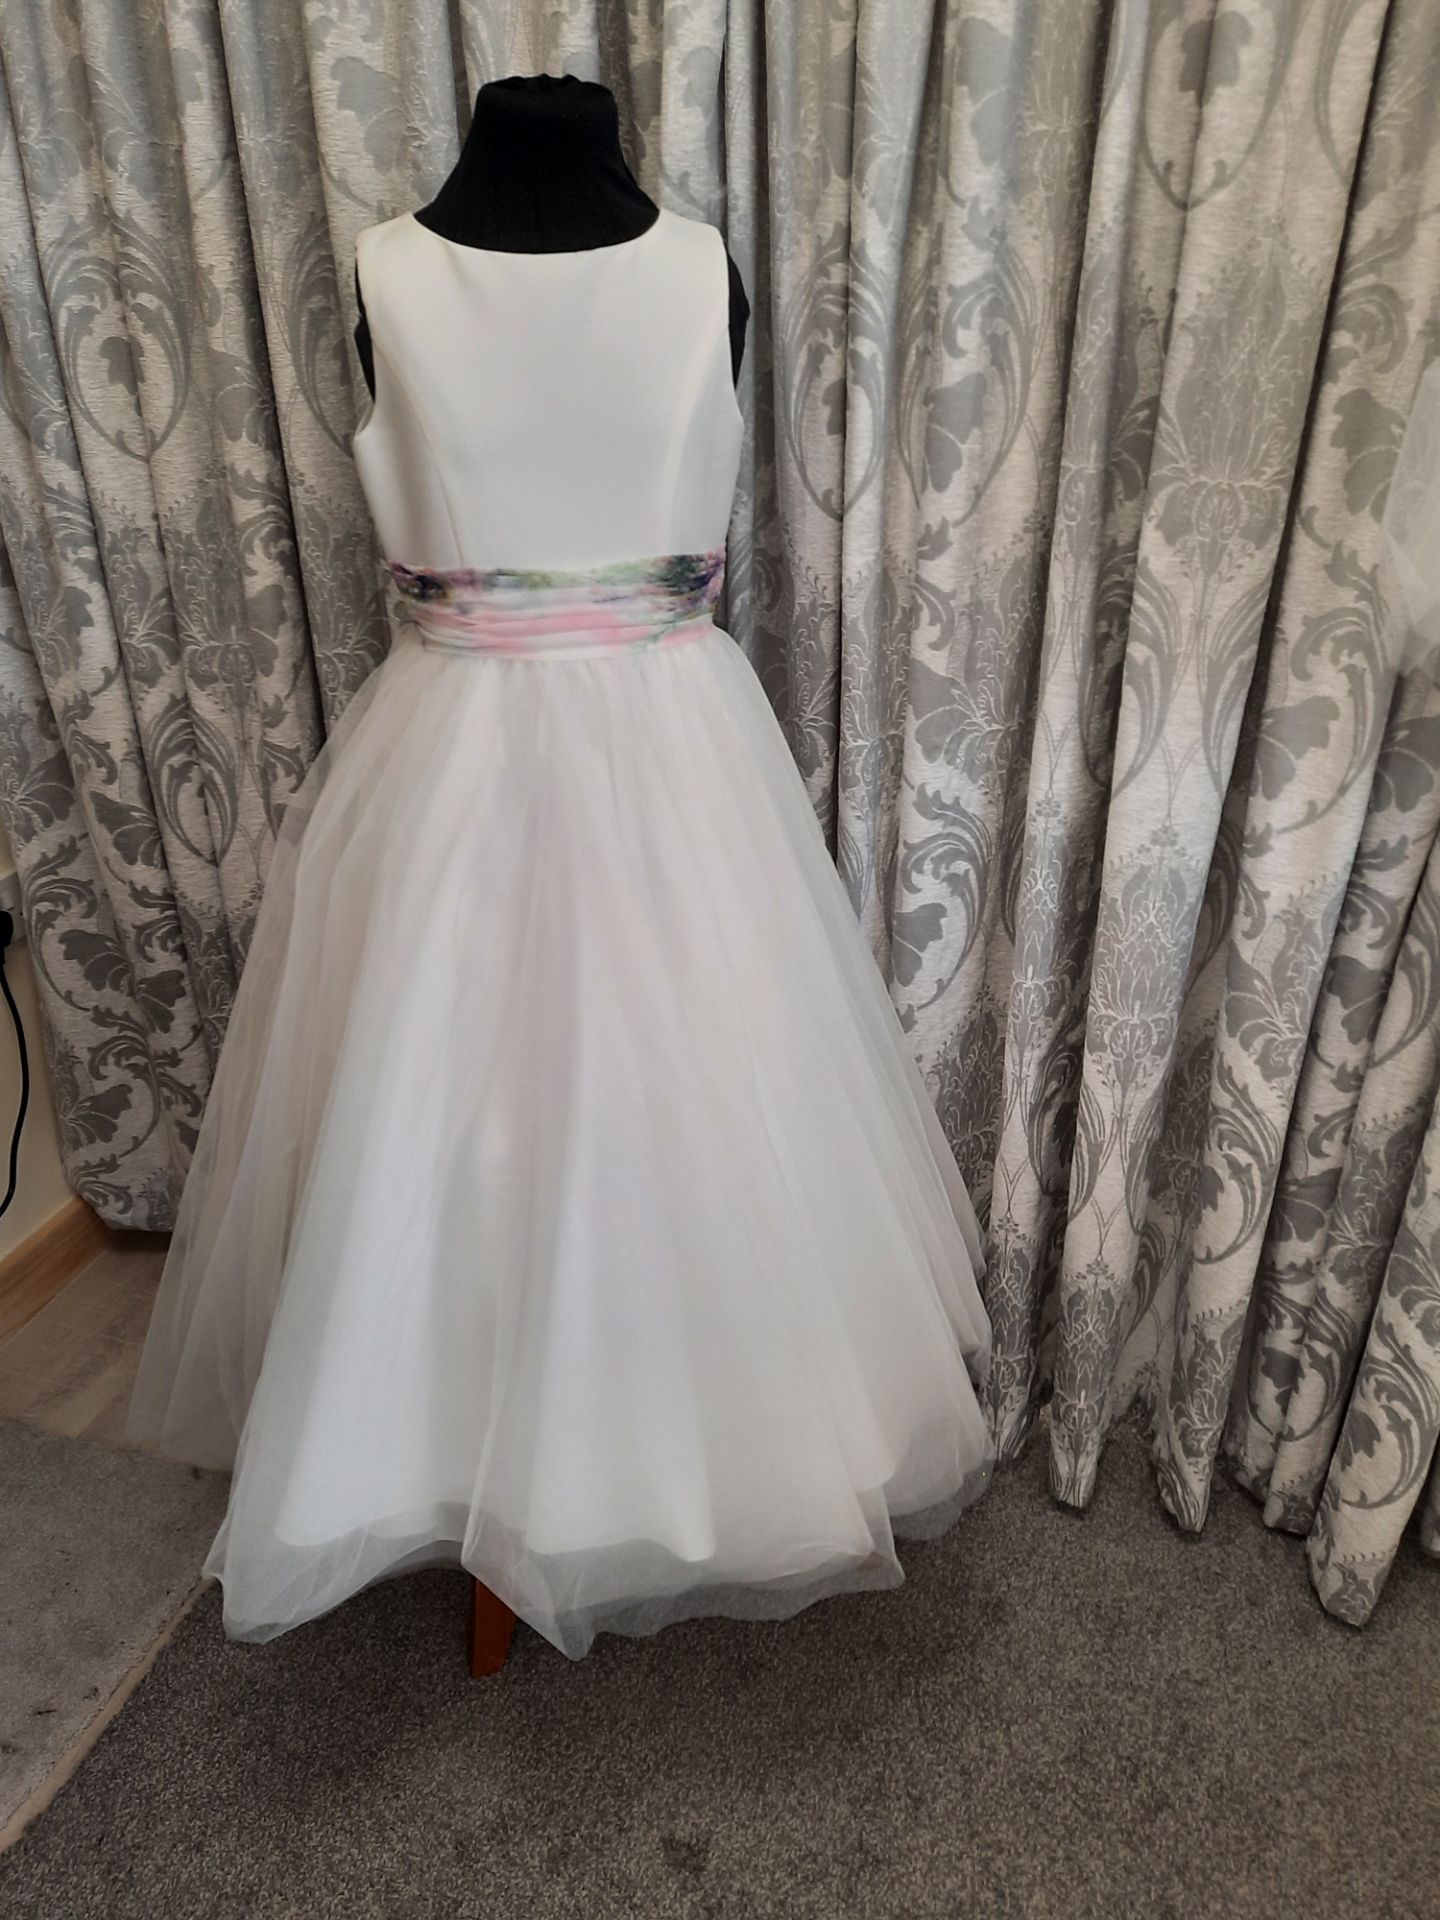 Richard Designs Flowergirl Dresses x 8 Mixed Colours and Sizes - Image 5 of 7